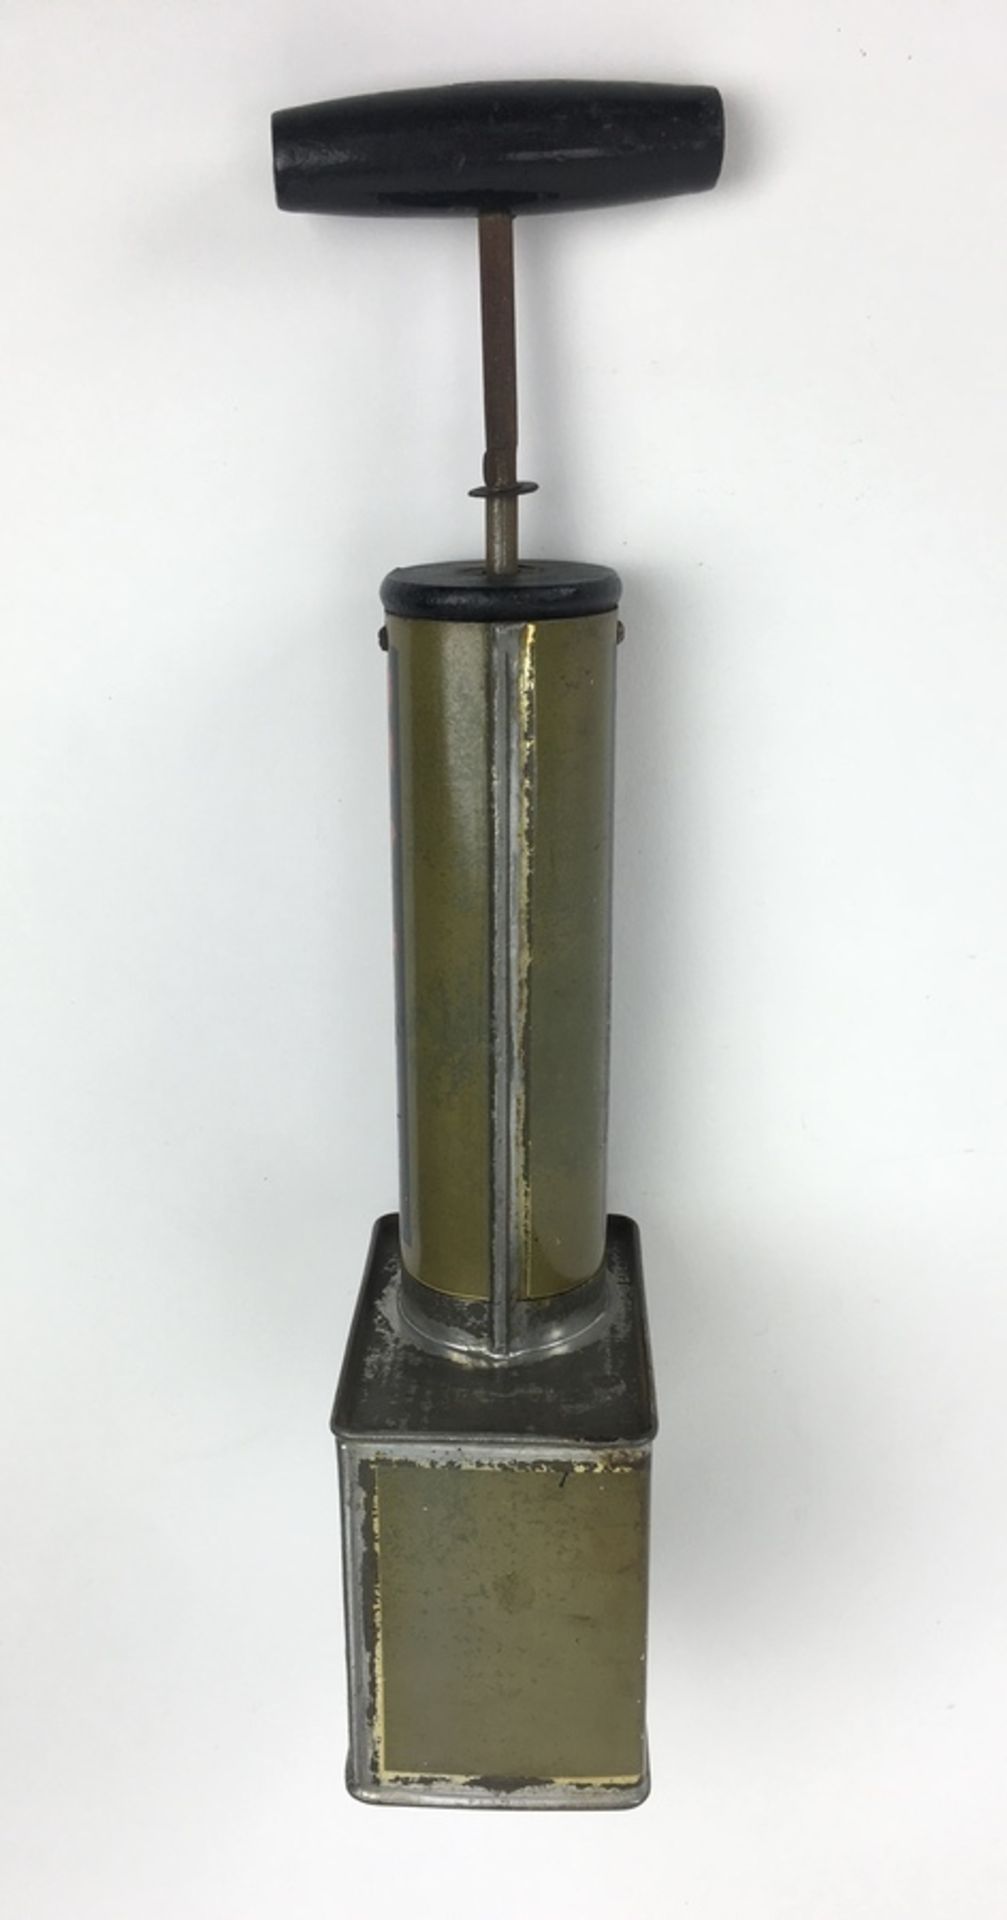 (Curiosa) Shell Tox insecticide verstuiver Shell Tox insecticide verstuiver uit de periode 1930 - Bild 6 aus 7